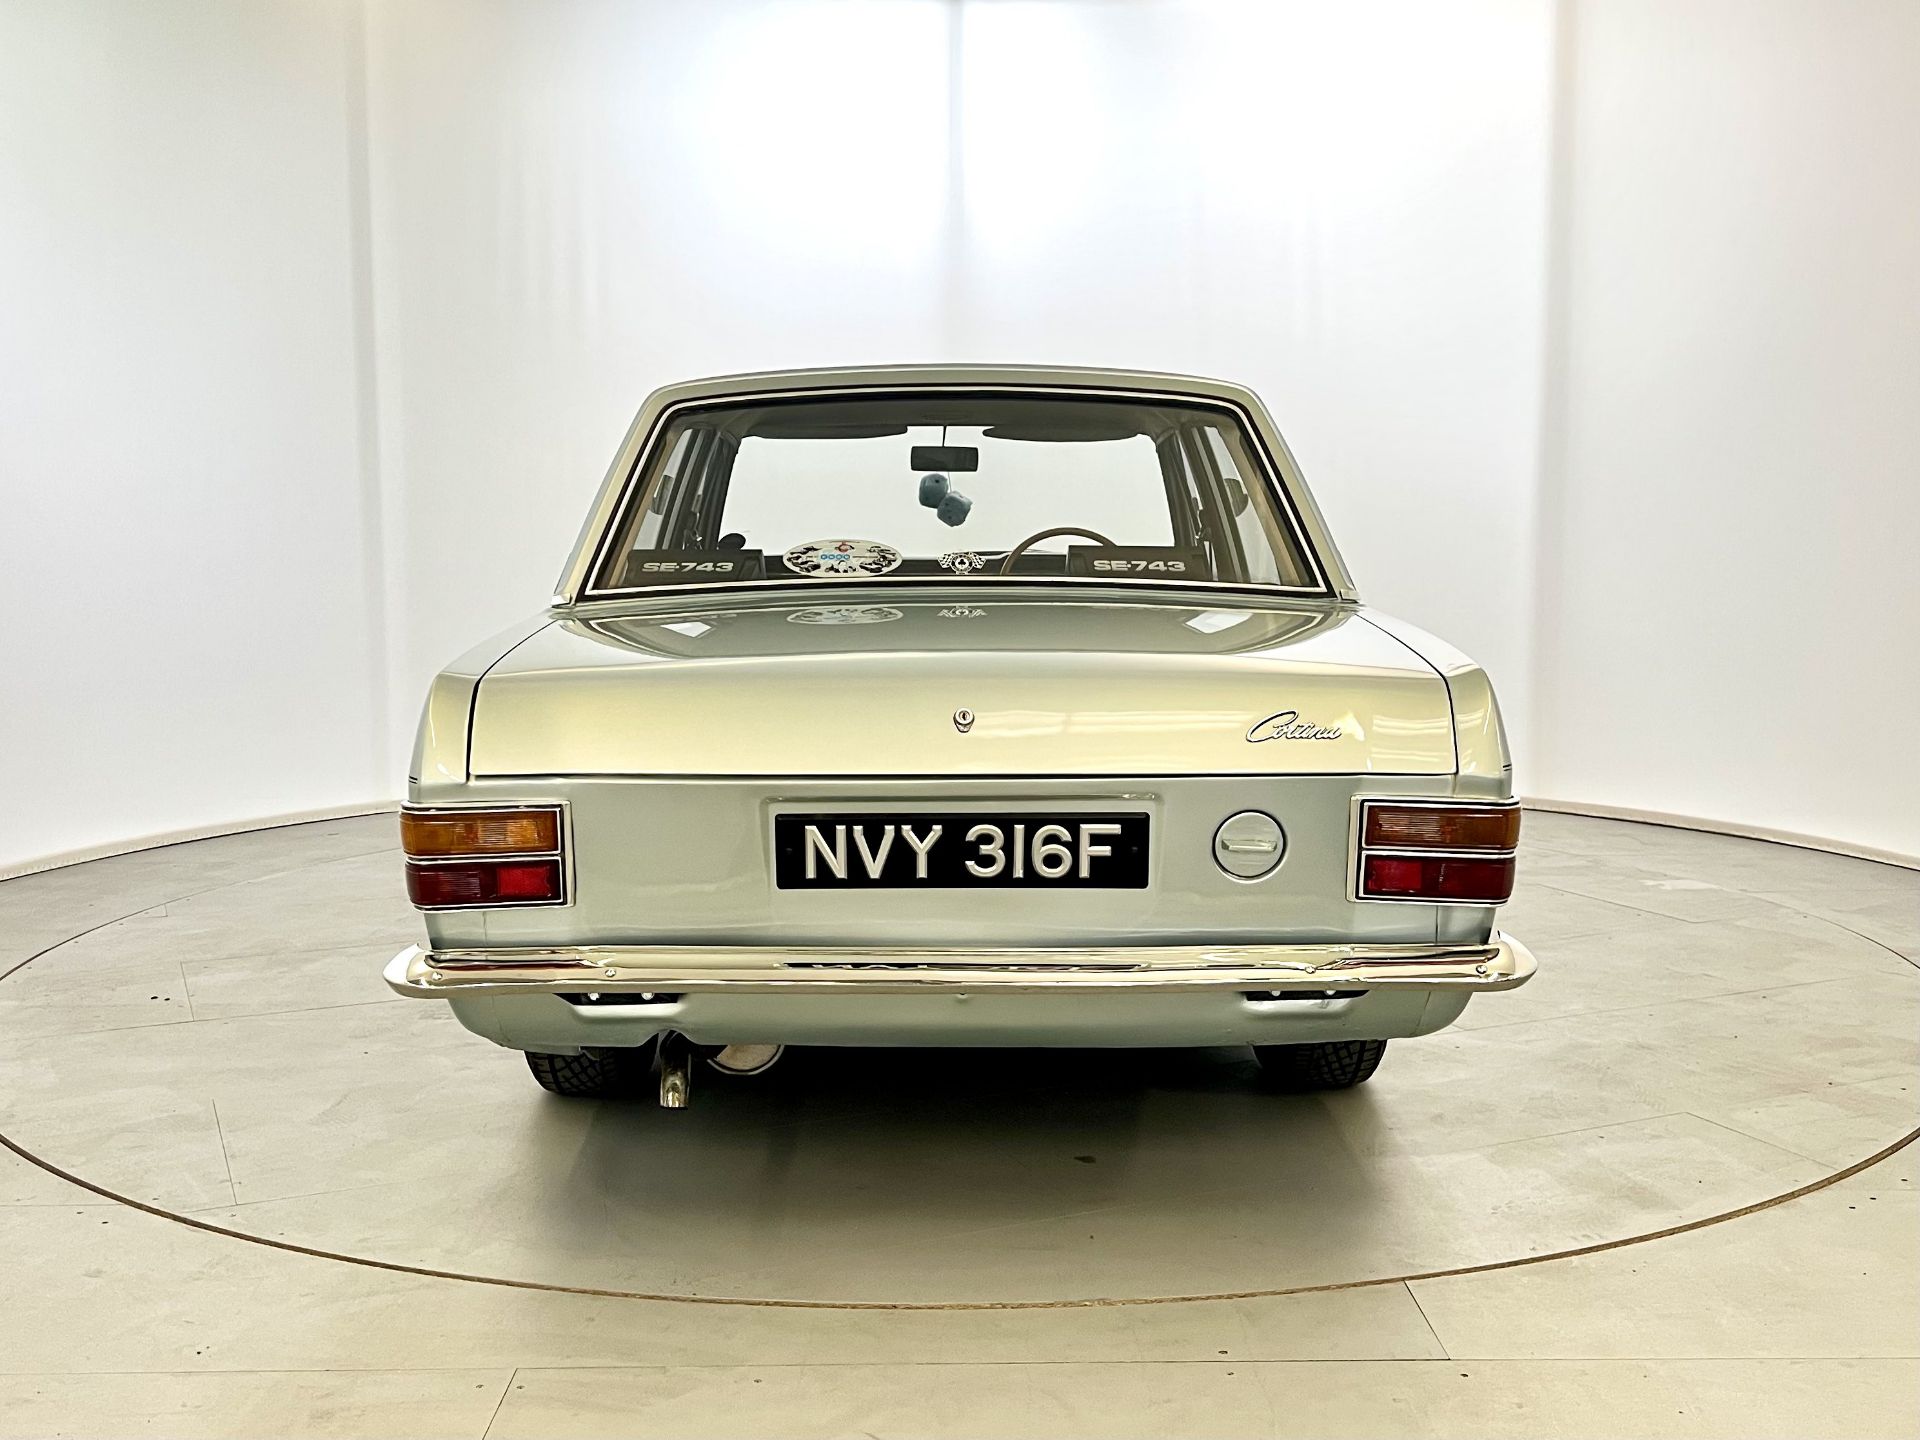 Ford Cortina 1300 DeLuxe - Image 8 of 36